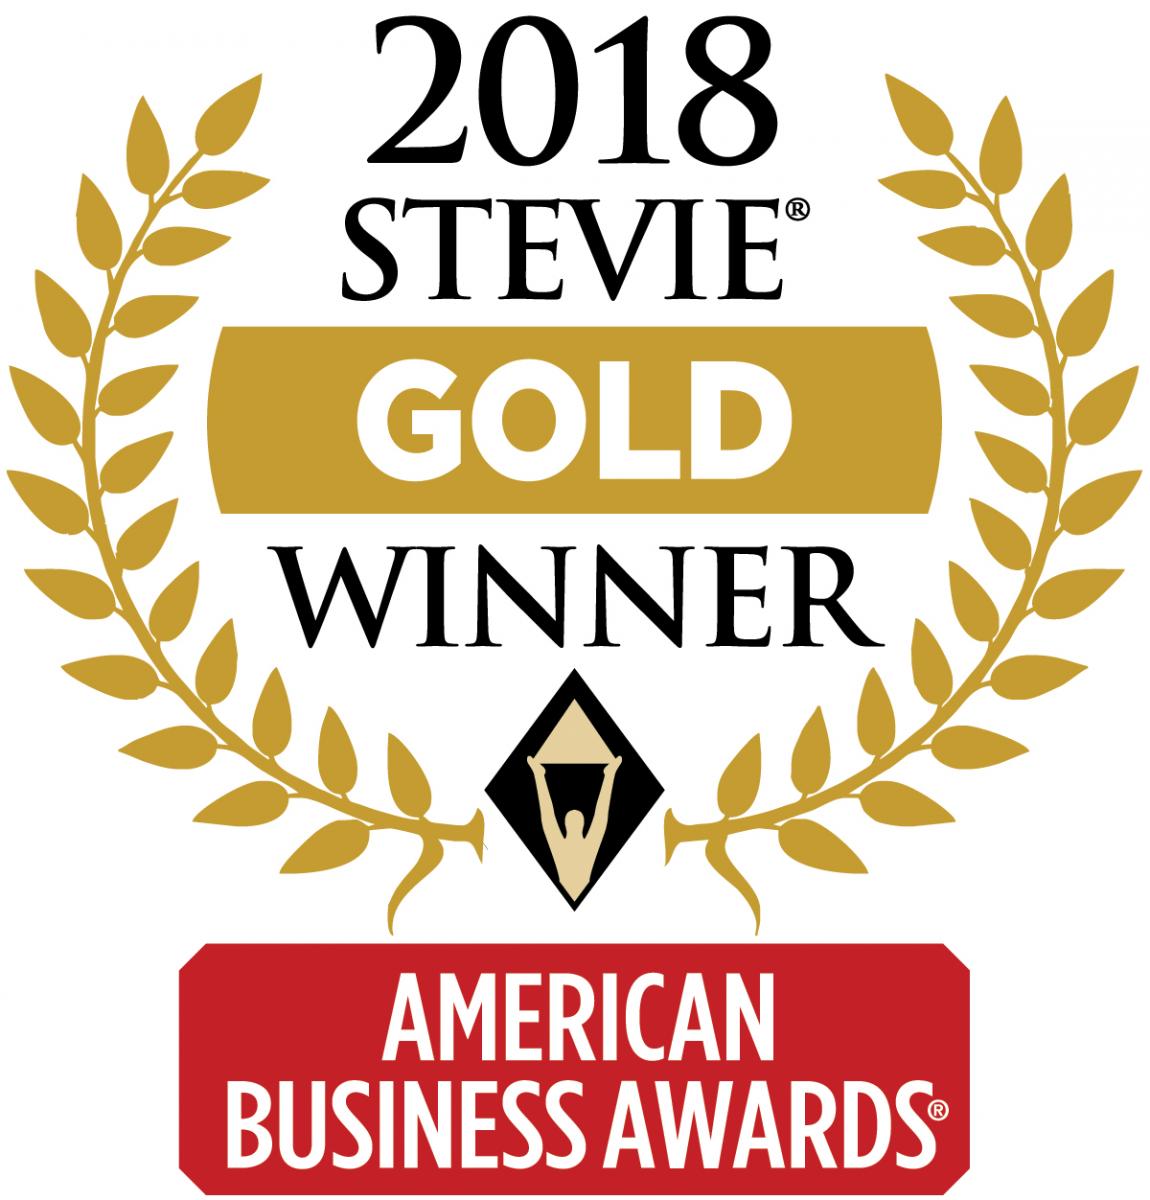 Leading web and mobile bill payment solution doxo was recently honored as a Gold Stevie® Award Winner.